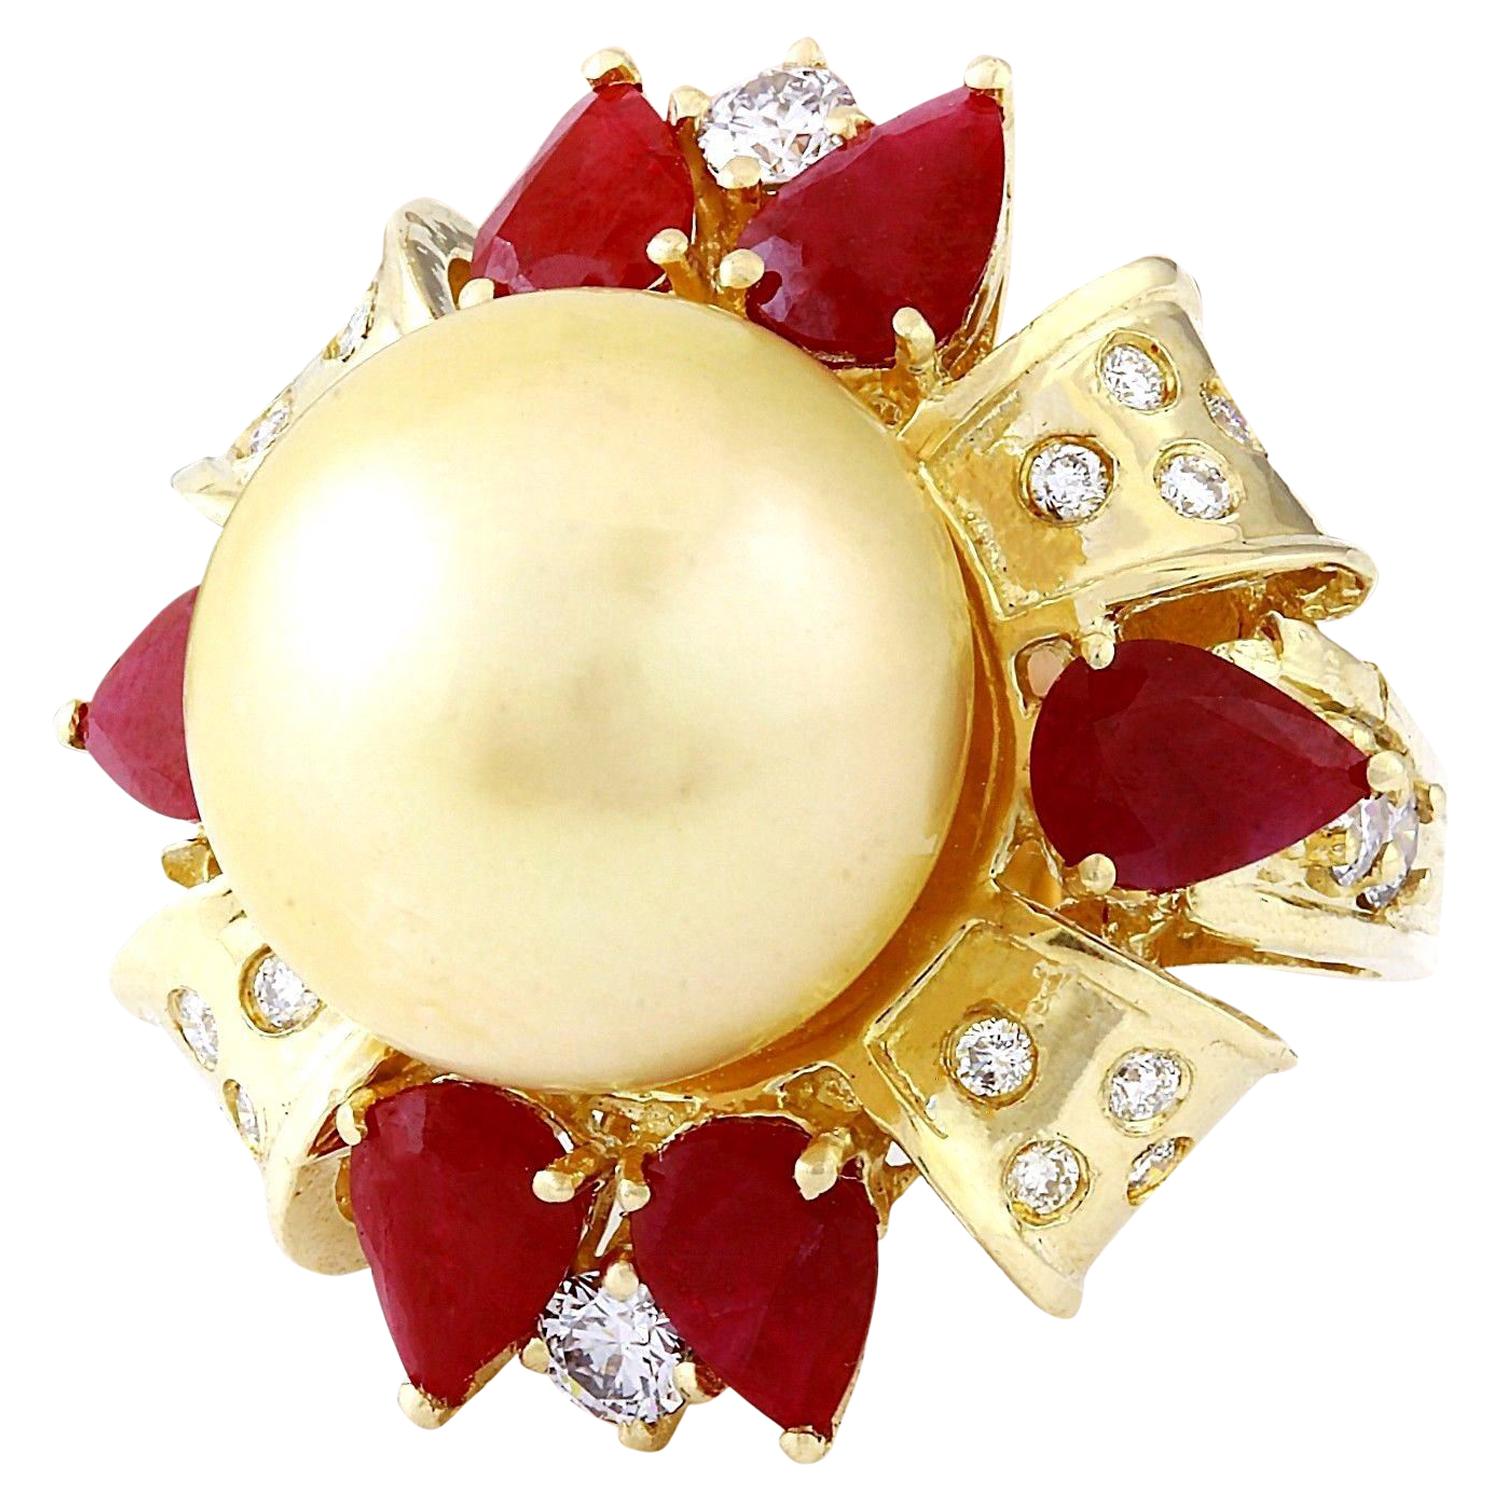 15.15 mm Gold South Sea Pearl, Ruby 18K Solid Yellow Gold Diamond Ring
 Item Type: Ring
 Item Style: Cocktail
 Material: 18K Yellow Gold
 Mainstone: South Sea Pearl
 Stone Color: Gold
 Stone Shape: Round
 Stone Quantity: 1
 Stone Dimensions: